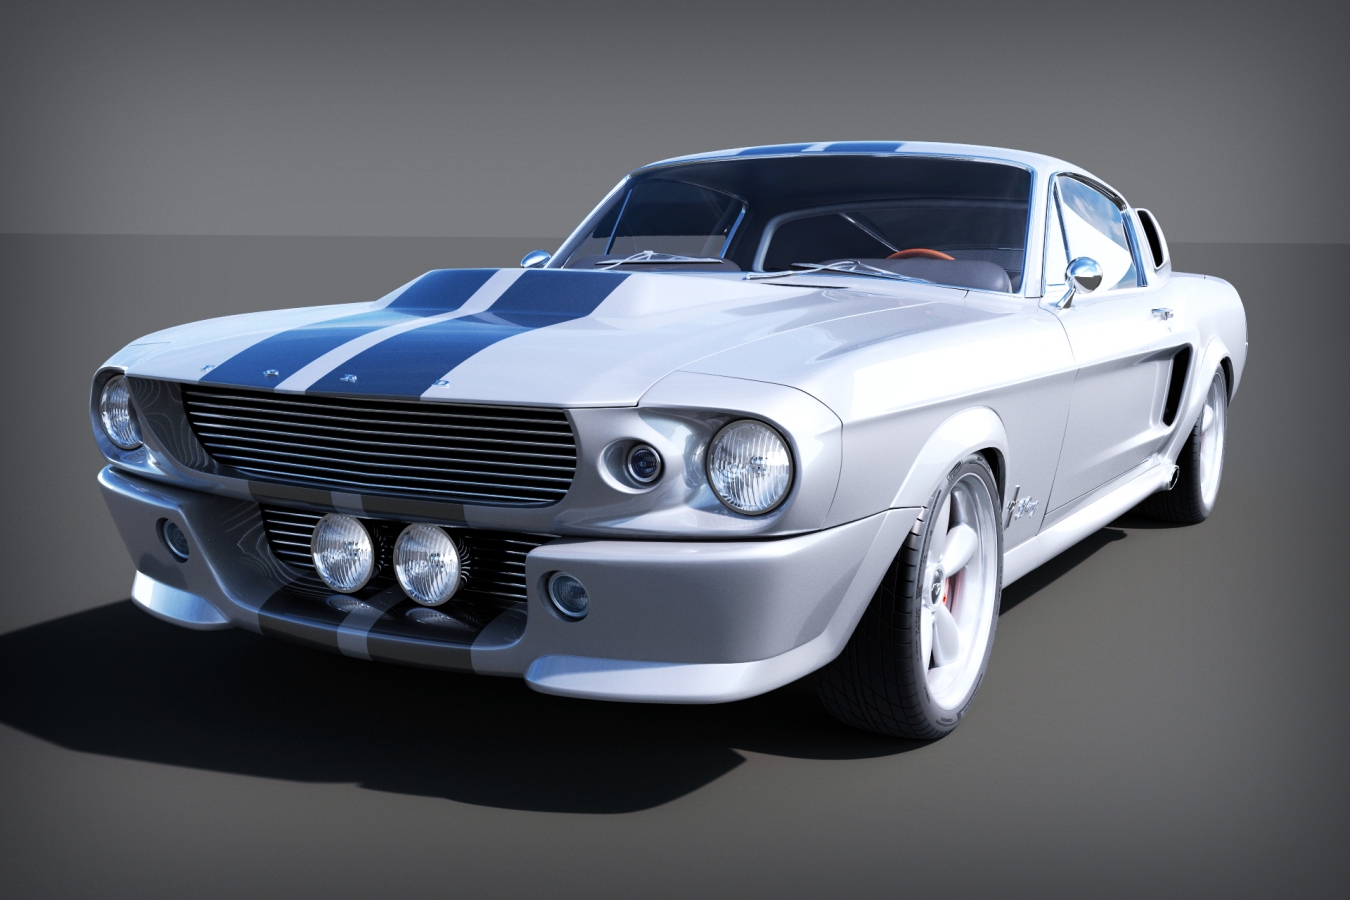 Ford-Mustang-Gt500-Eleanor-view01-View01.jpg